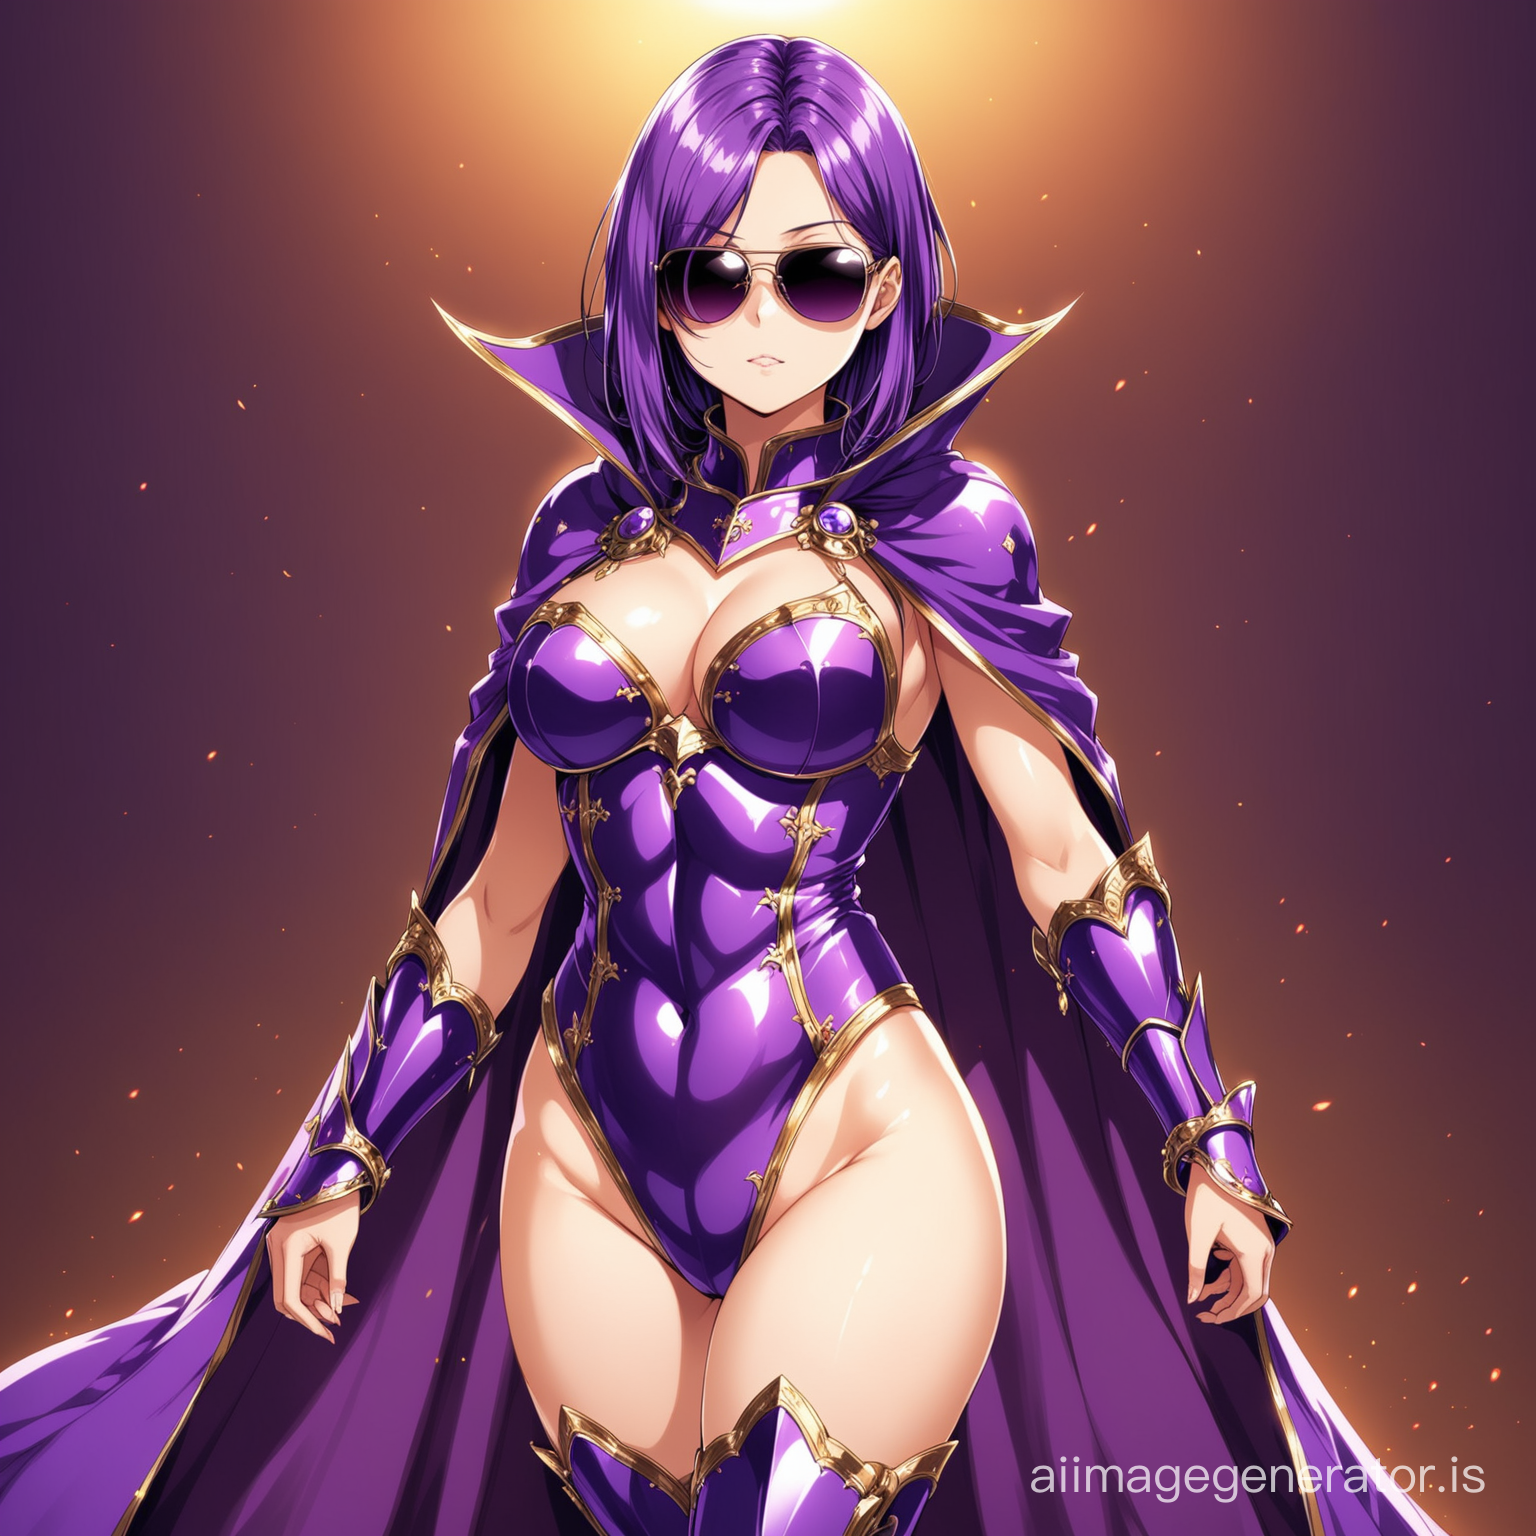 hot anime girl in a royal revealing purple armour wearing a cape and a pair of sunglasses 